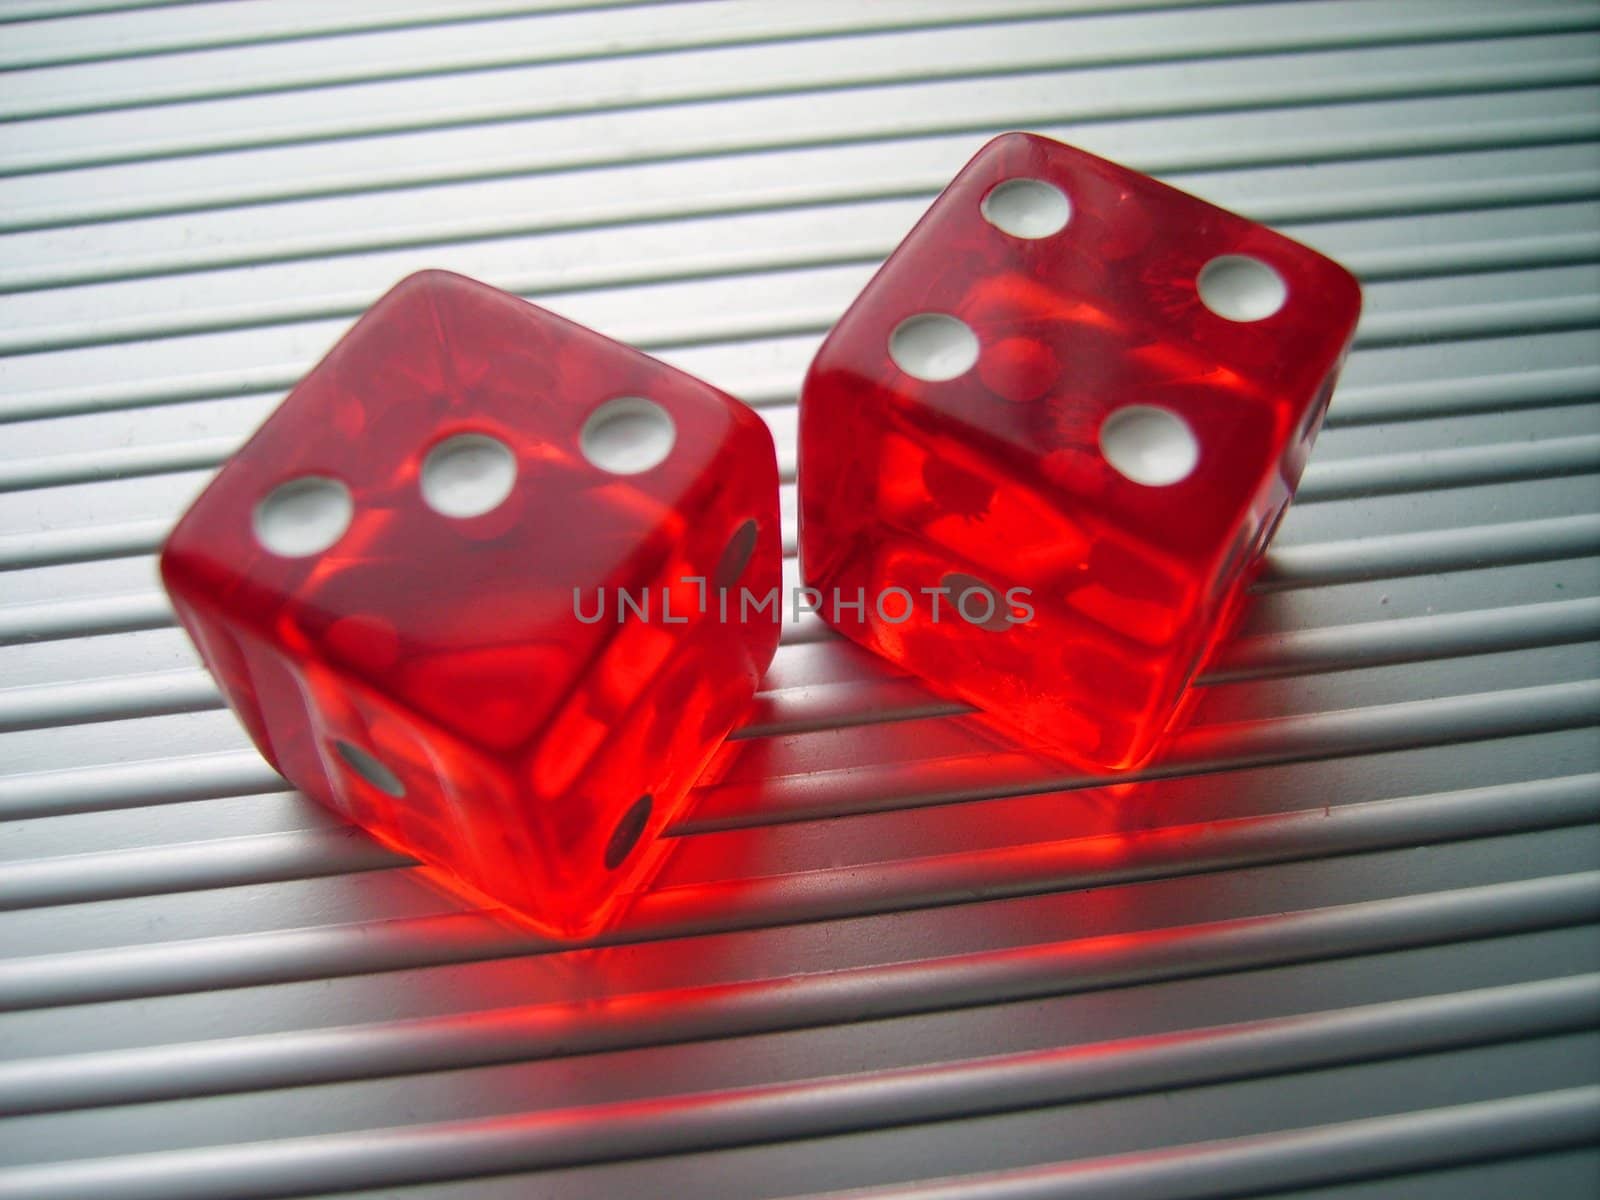 an image with two red casino dice showing a three and a four